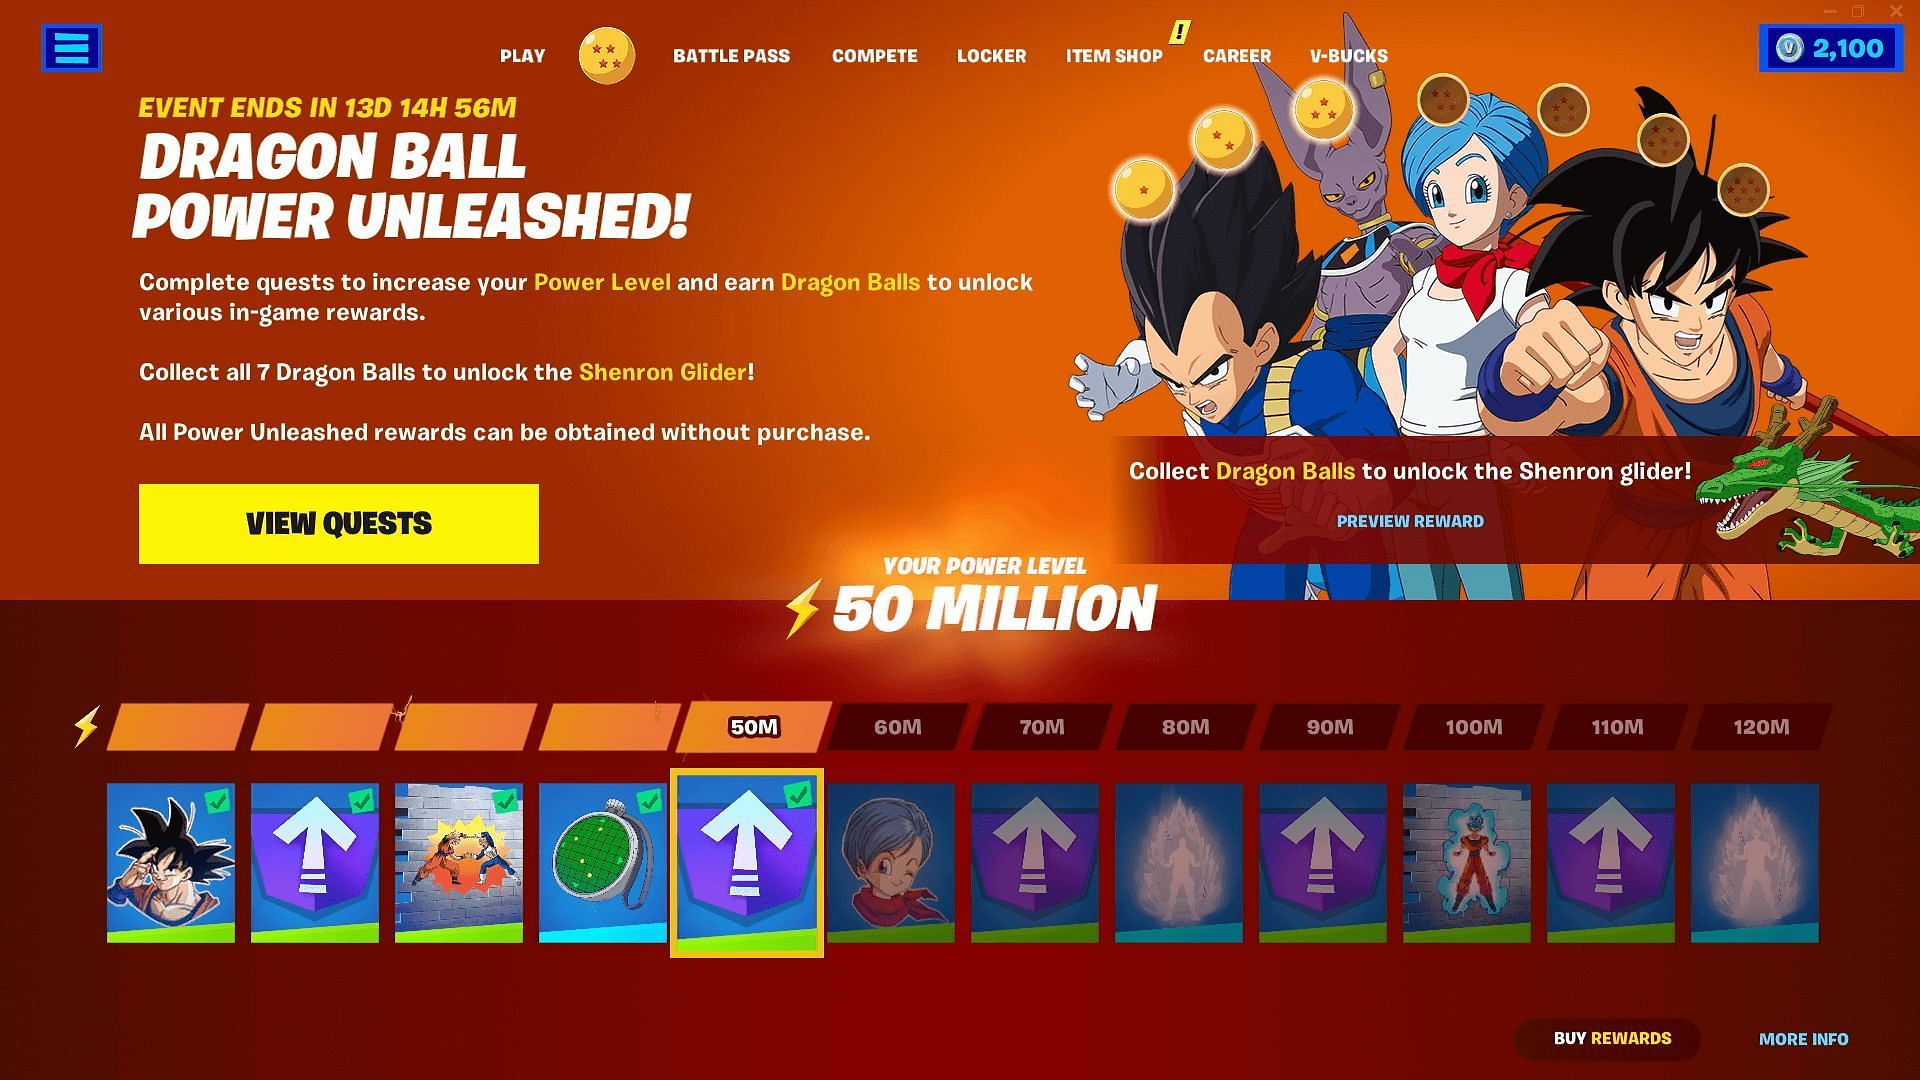 Power Unleashed quests for Fortnite x Dragon Ball collab (Image via Epic Games)